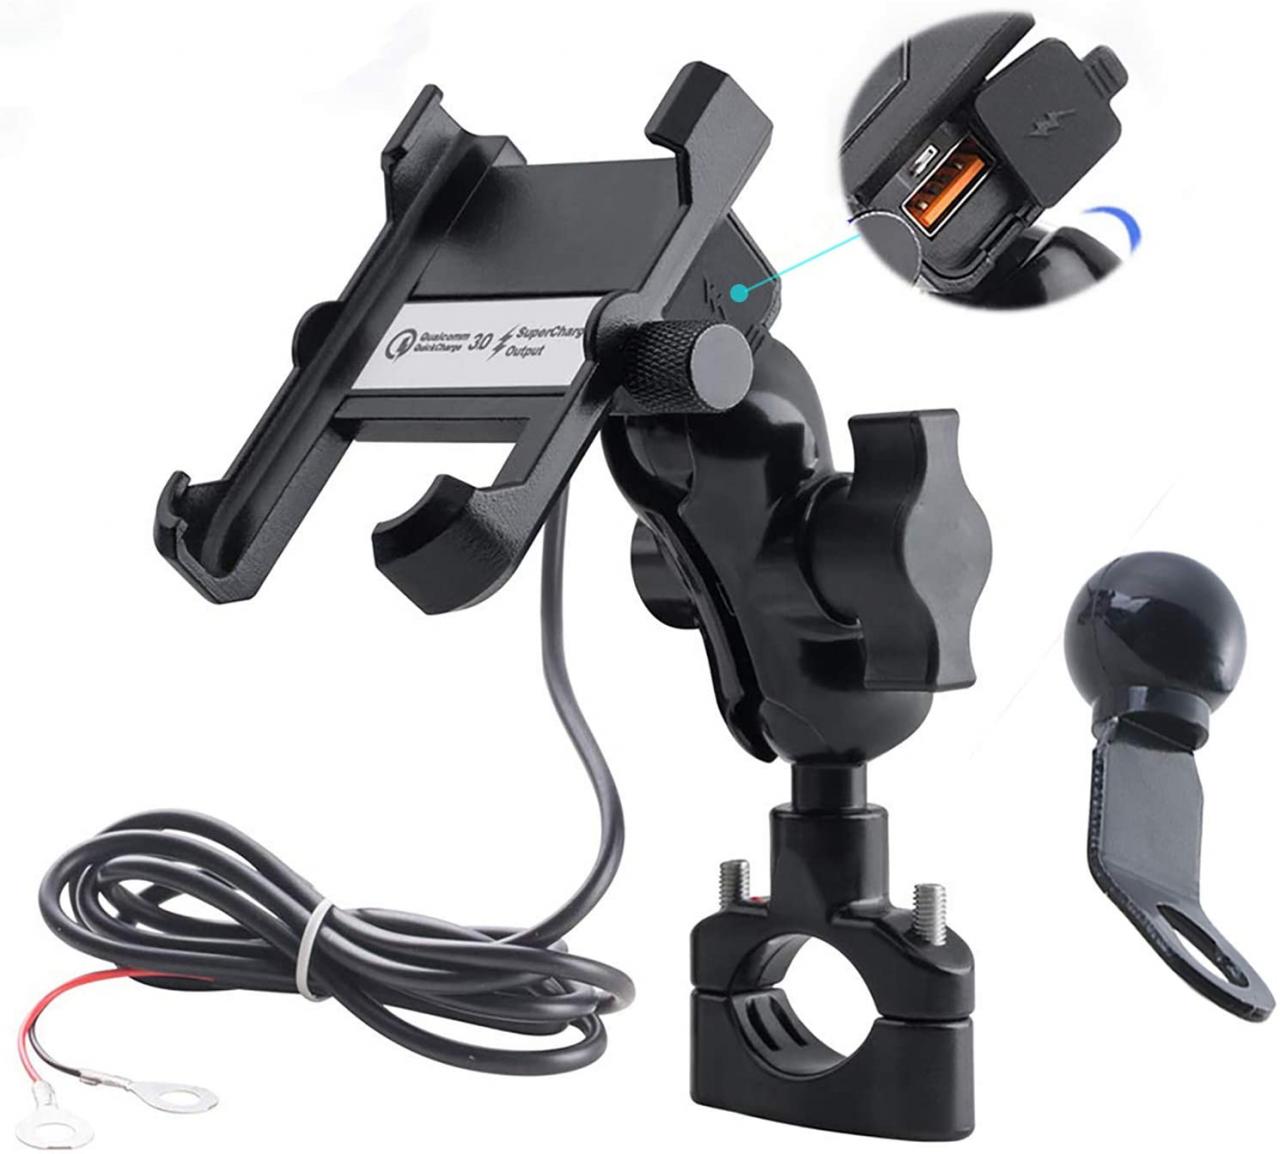 Buy iMESTOU Aluminium Motorcycle Phone Mount Handlebar USB 3.4A Quick  Charge Cell Phone Holder Waterproof Handlebar/ Rear-View Mirror 360  Rotation Bracket for iPhone/Samsung on 10-24V Vehicles Online in Taiwan.  B07W1GJB7V